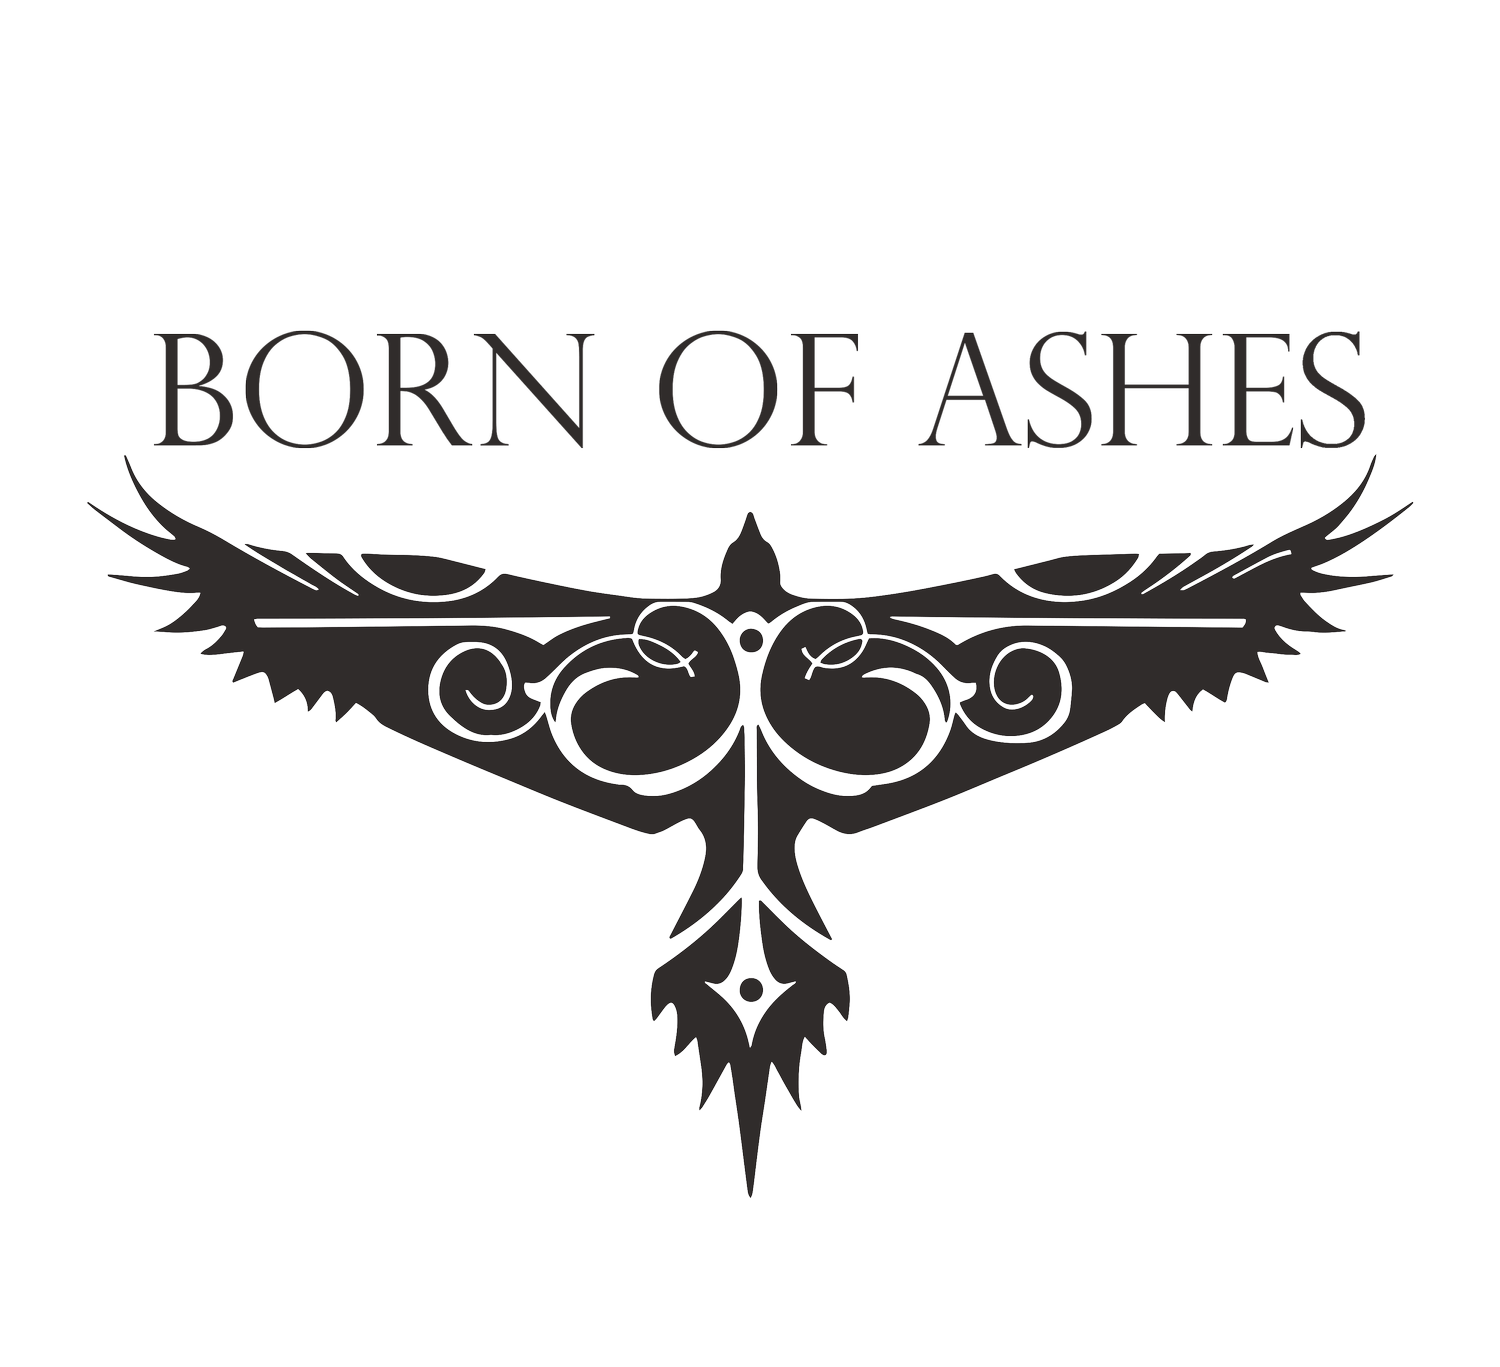 BORN OF ASHES